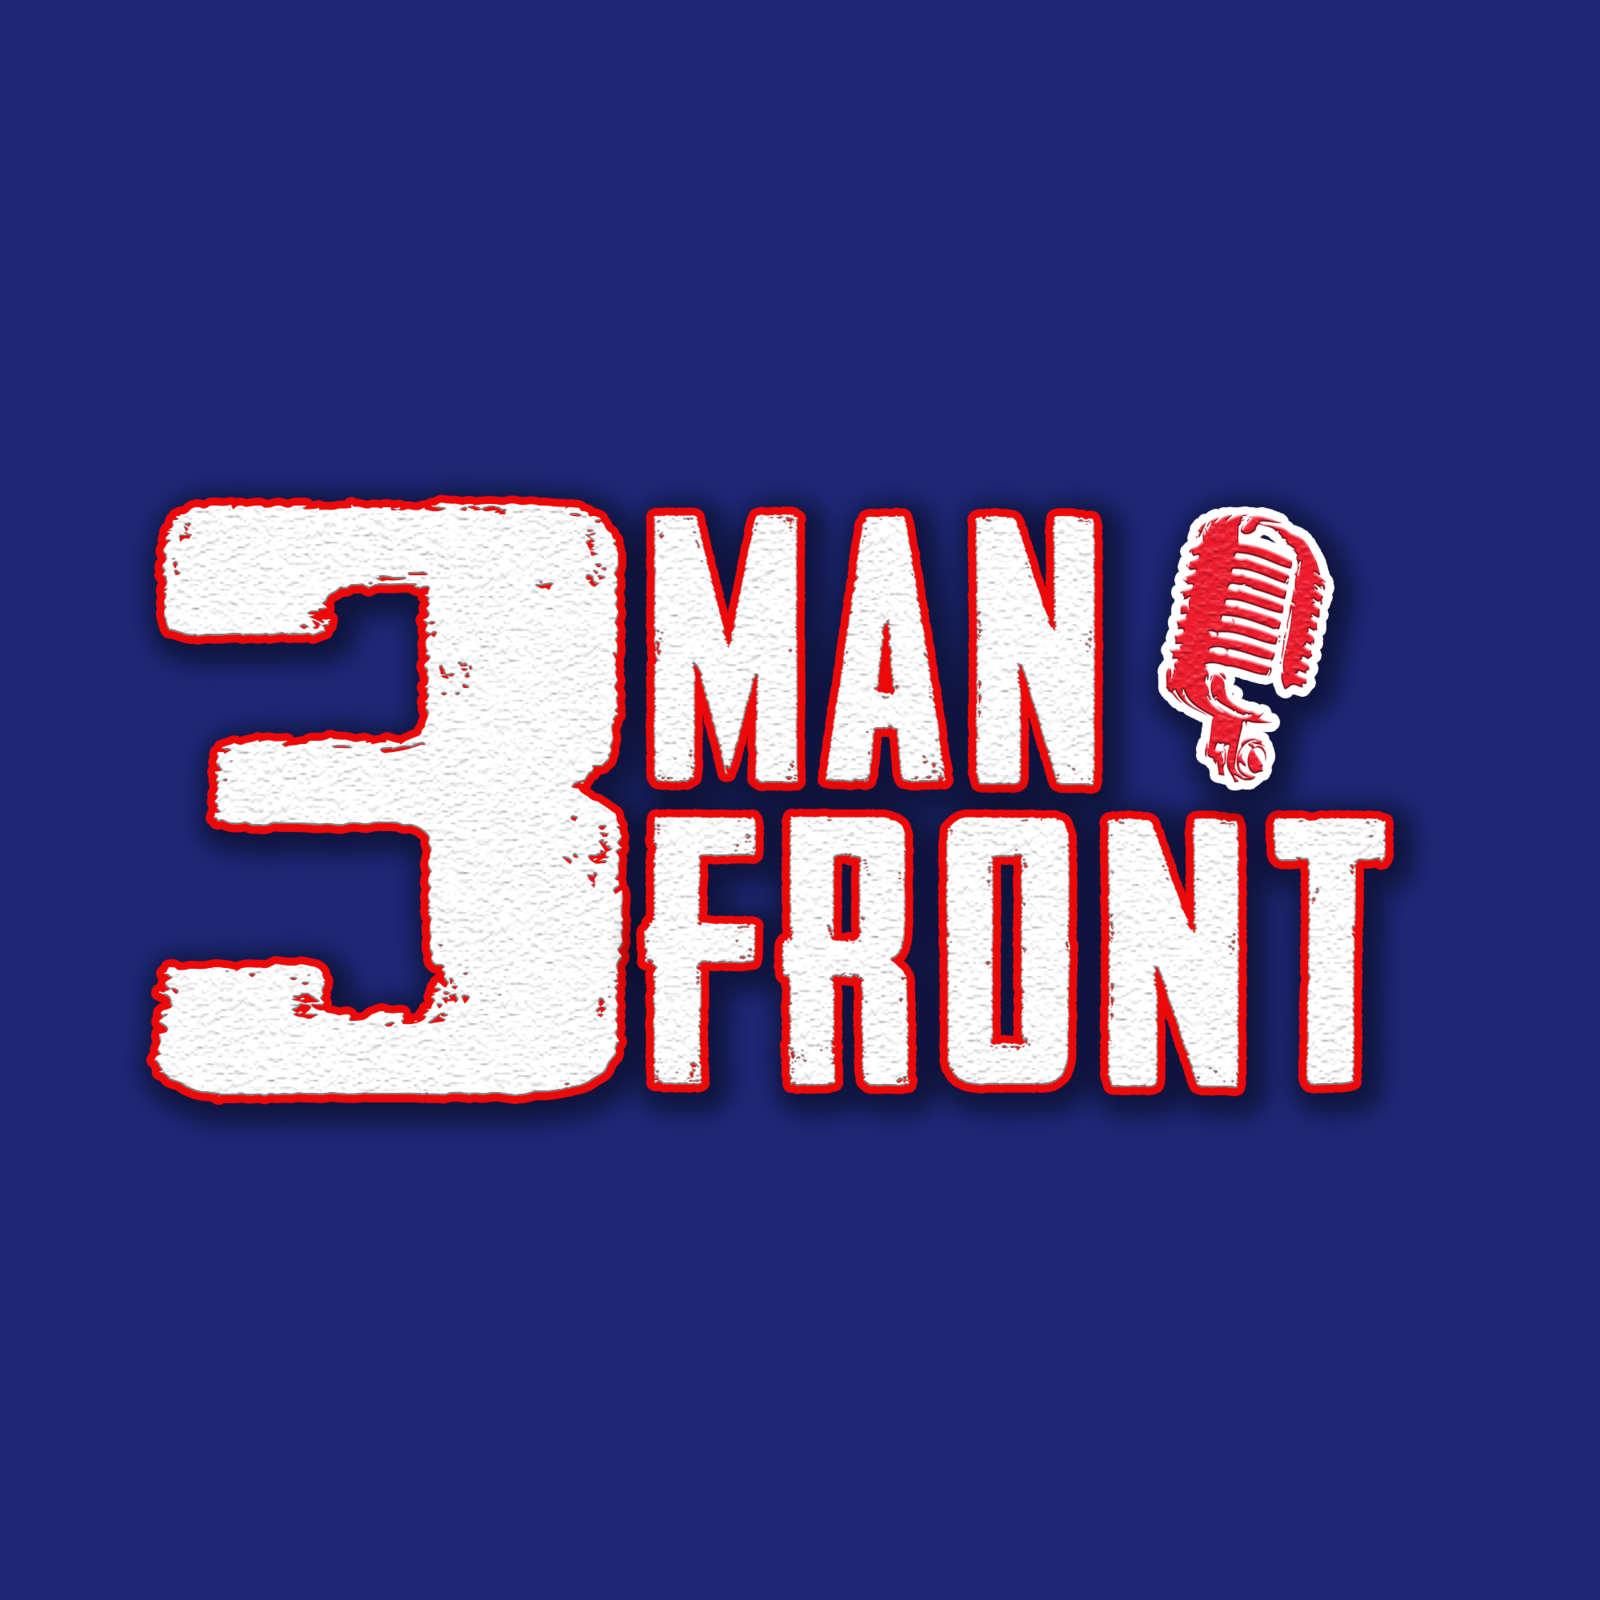 6-18-24 3 Man Front Hour 1: Mike Newton, Mike Griffith, and all the Rickwood festivities!